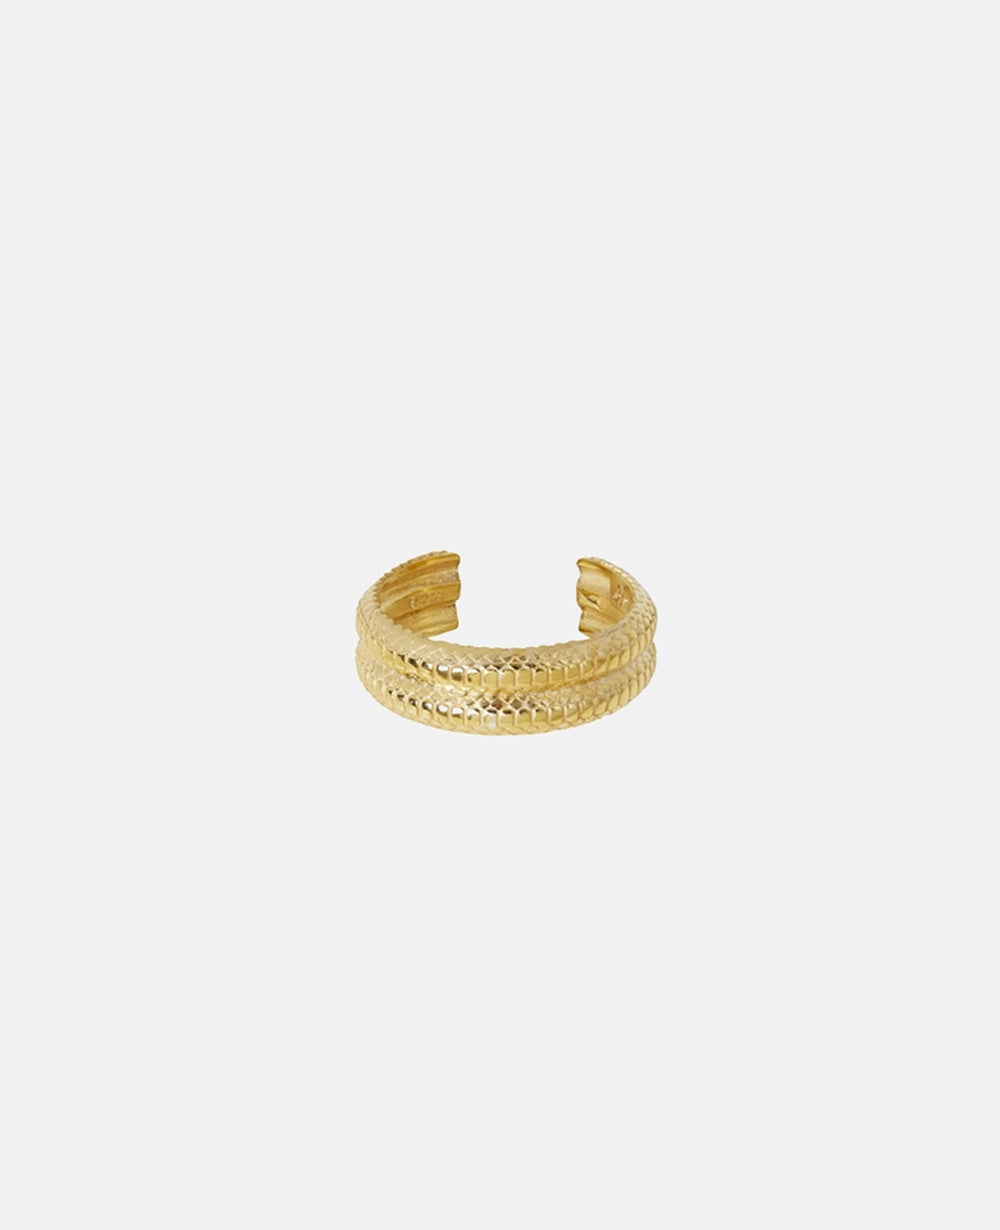 RING "TEMPTATION DOUBLE" GOLD